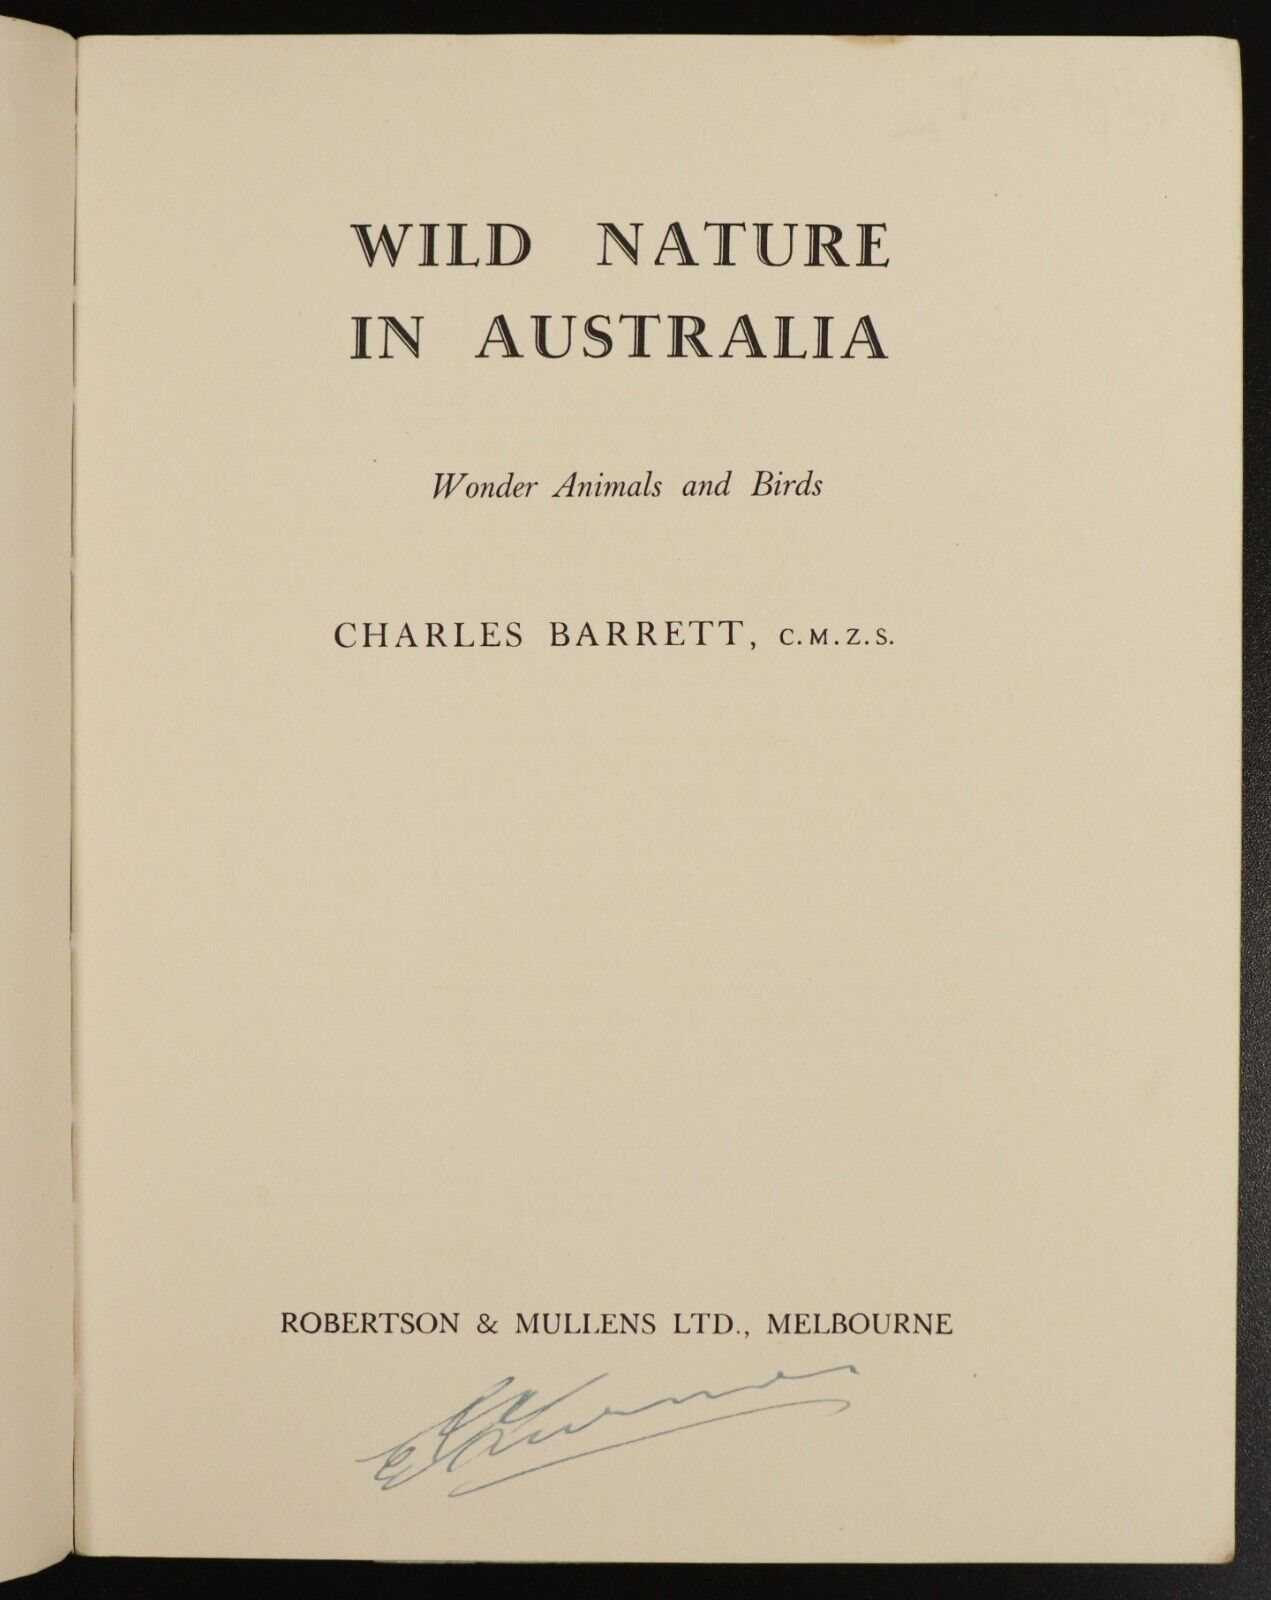 1938 Wild Nature In Australia by Charles Barrett 1st Ed. Natural History Book - 0